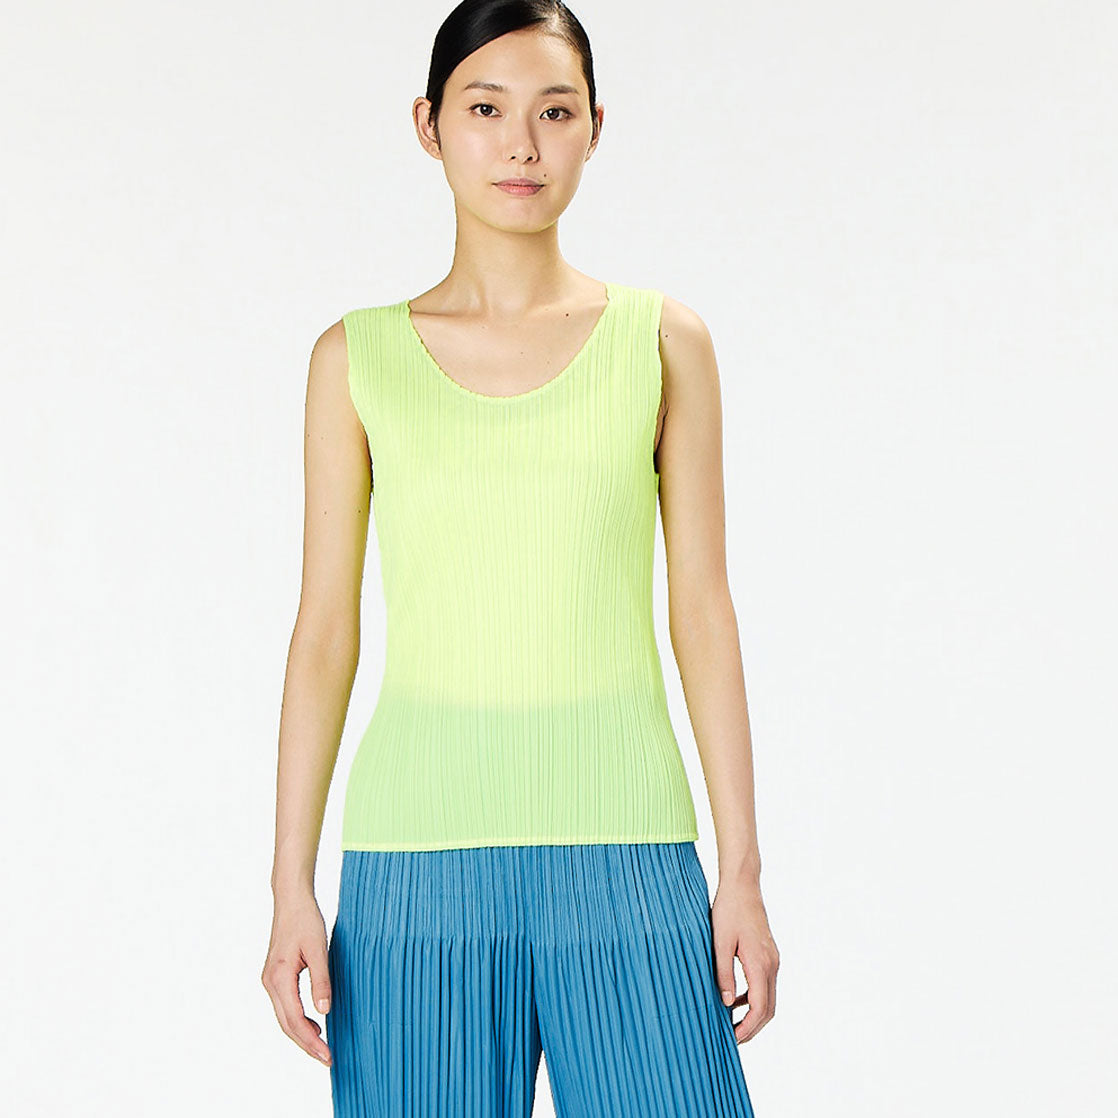 Half body photo of model wearing the Monthly Colors Shirt - Neon Yellow.